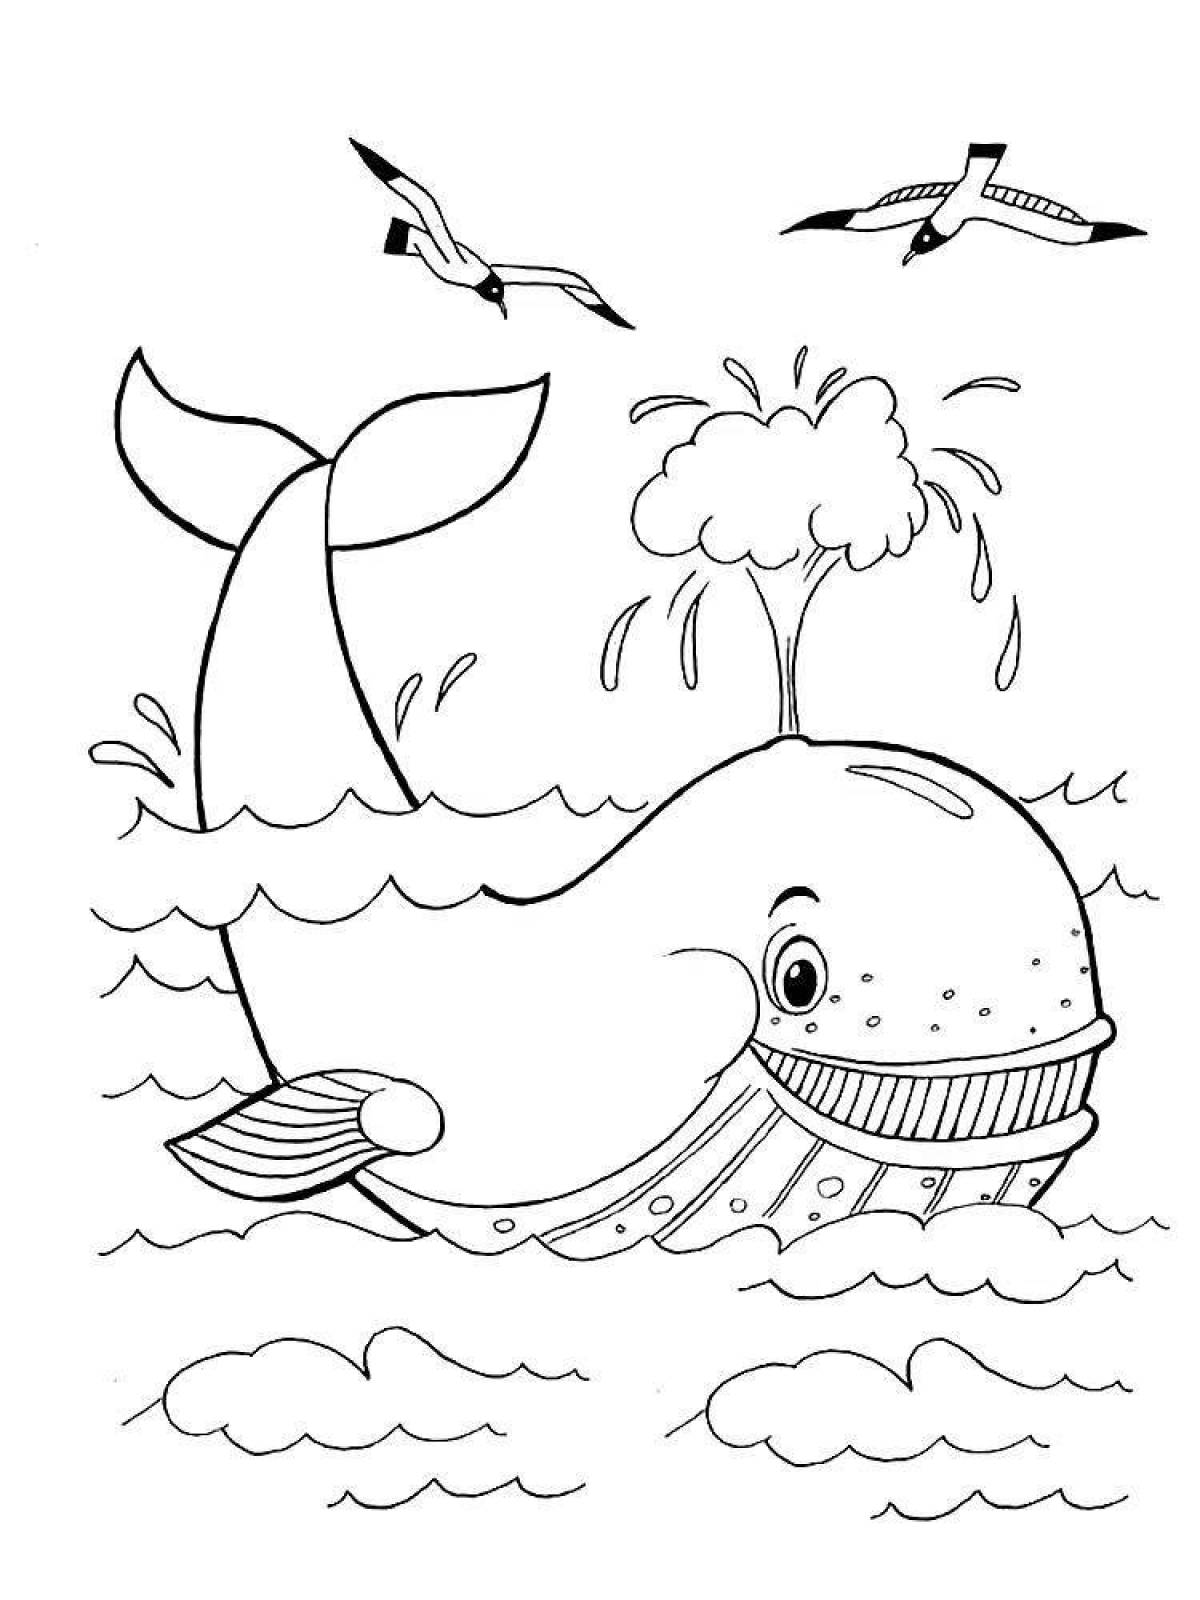 Coloring page of serene water for kids